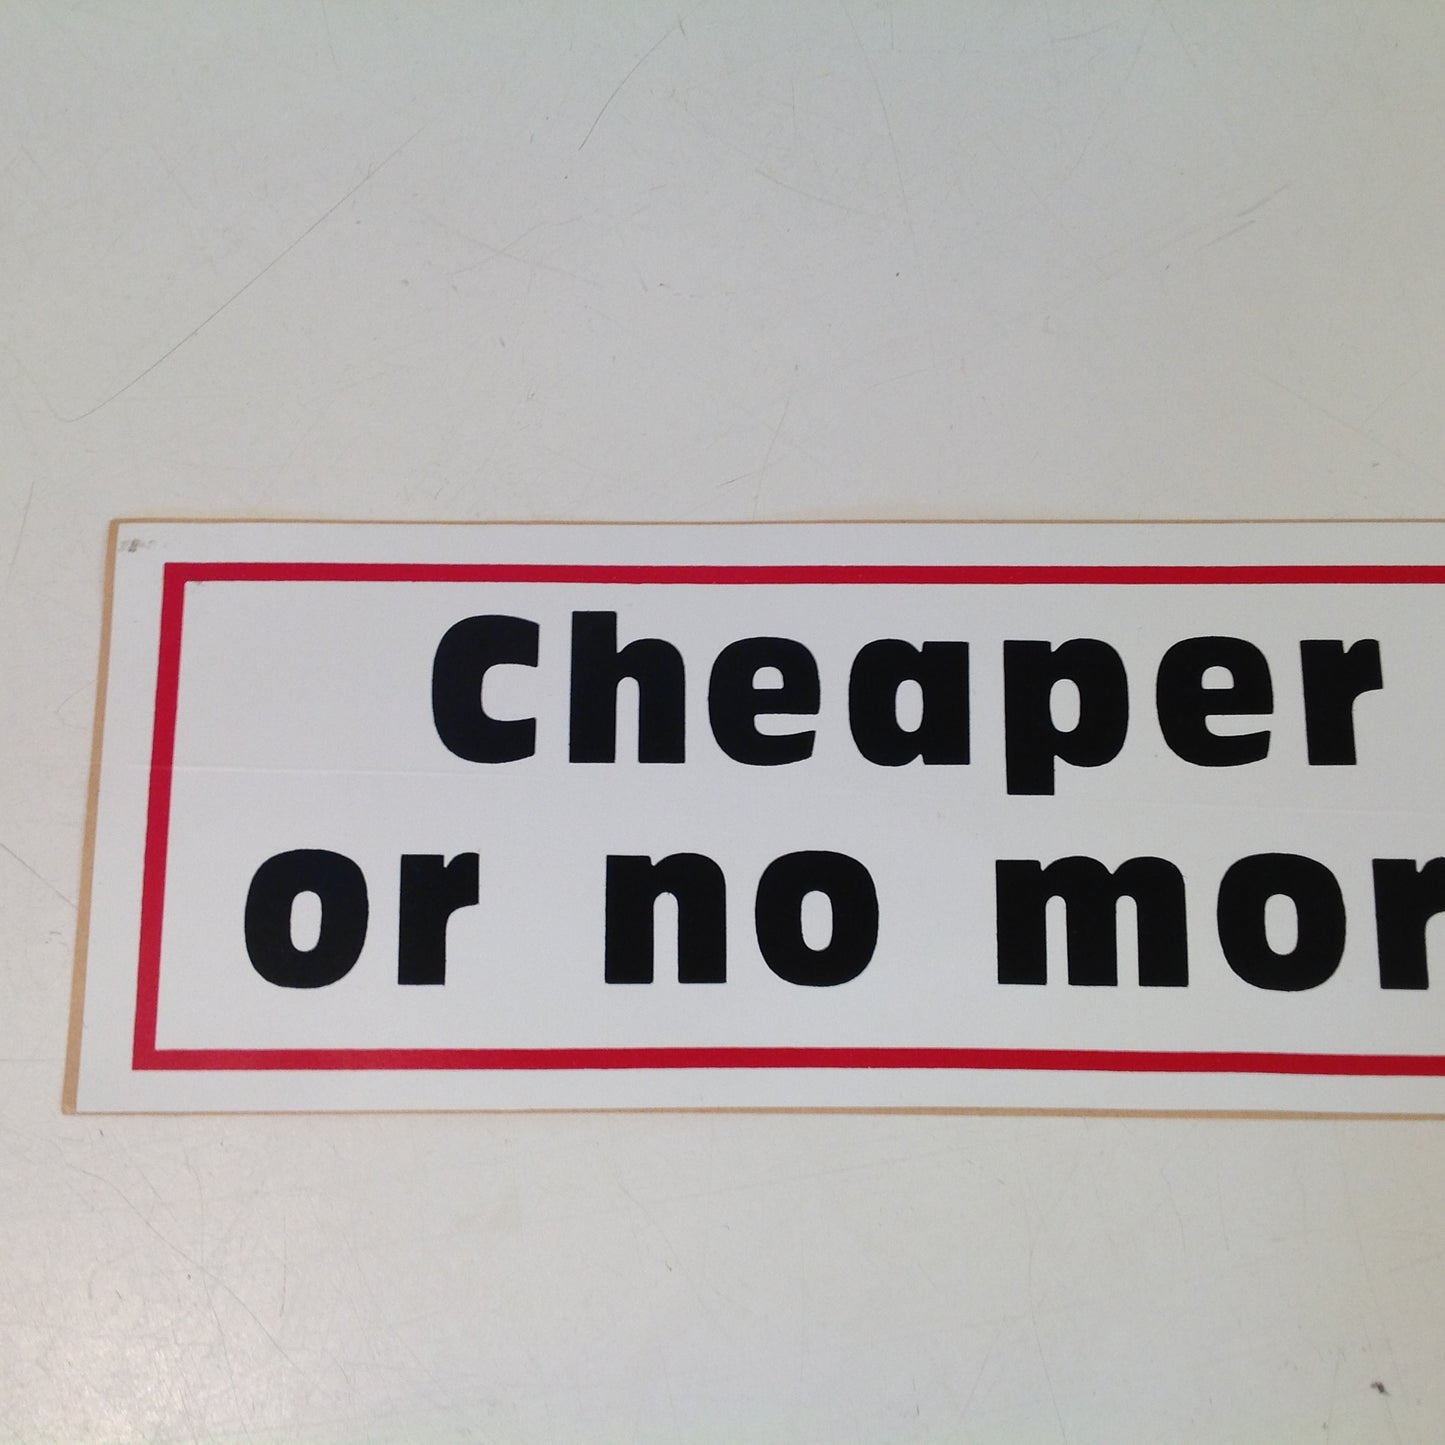 Vintage 1979 Bumper Sticker Bobby (Sofine) Butler Novelty Song Cheaper Crude or No More Food